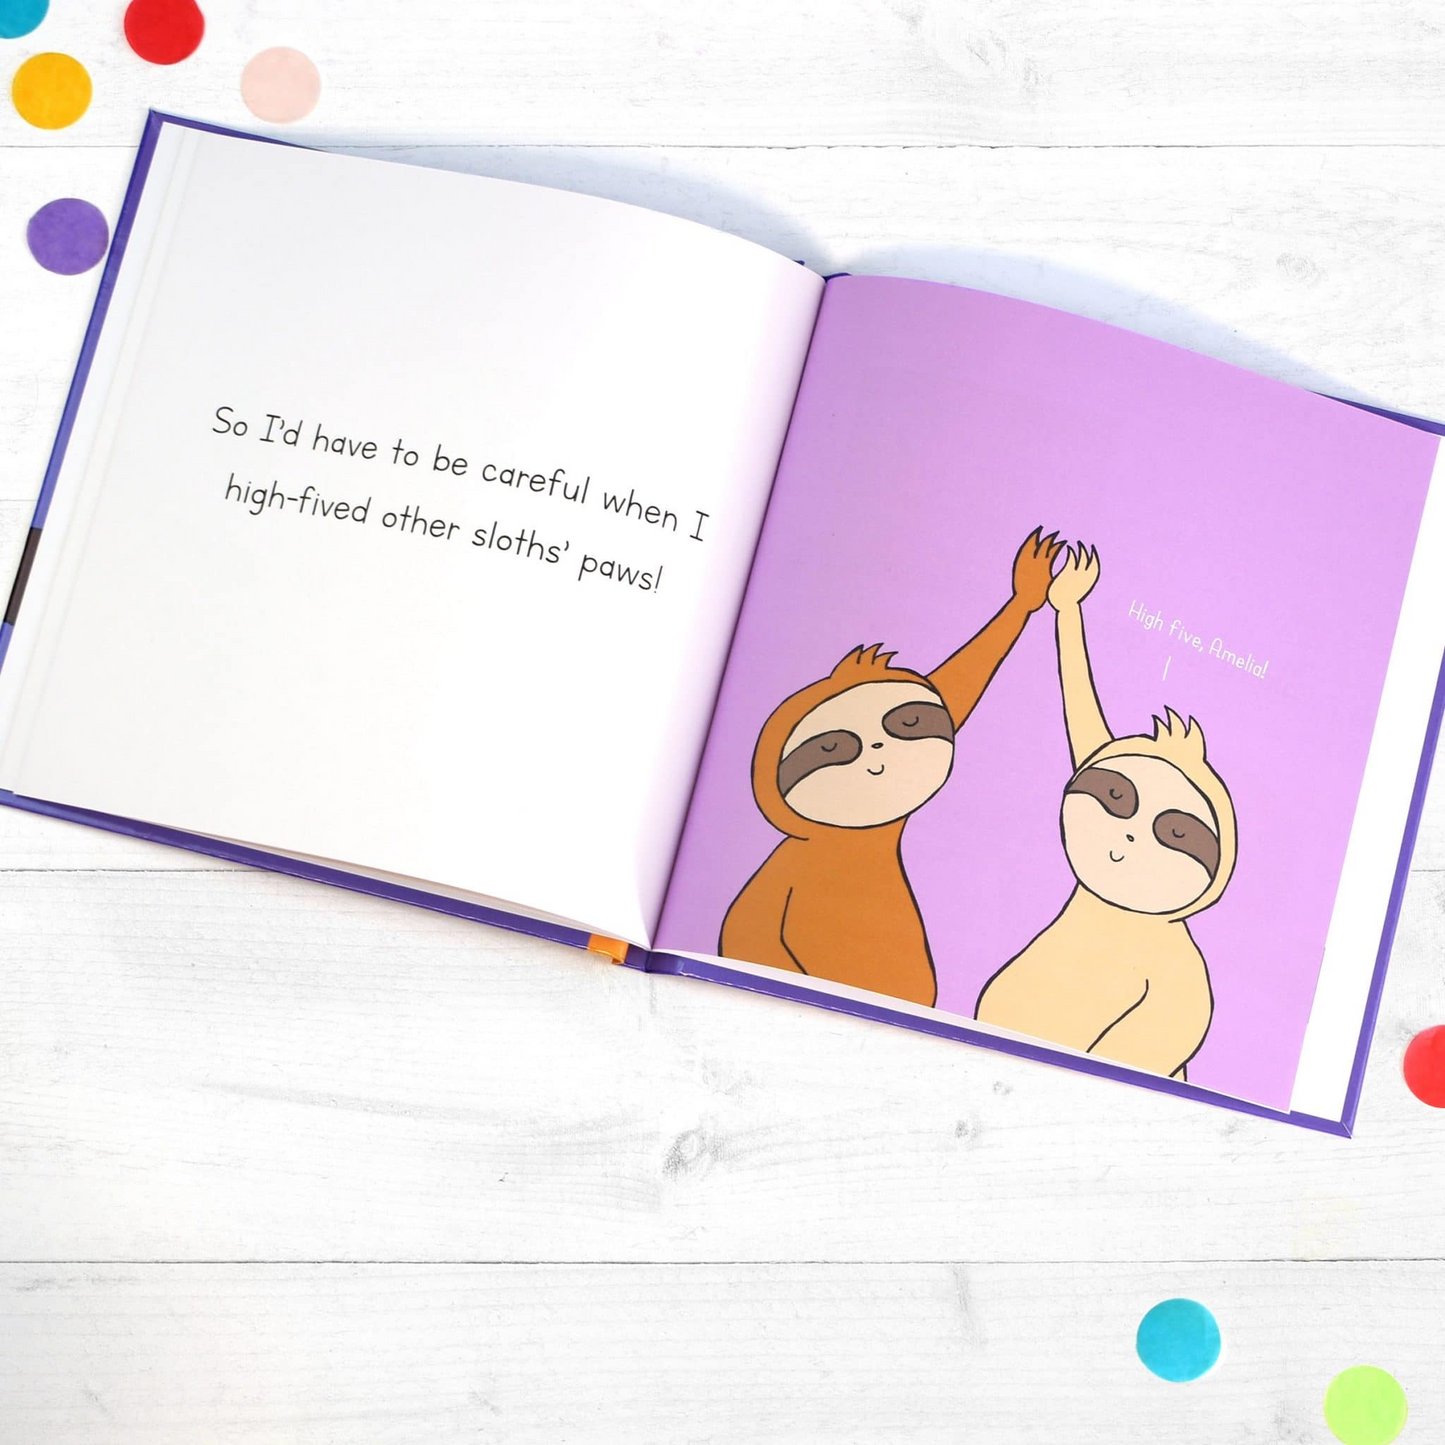 Personalised I’d Rather Be A Sloth Book